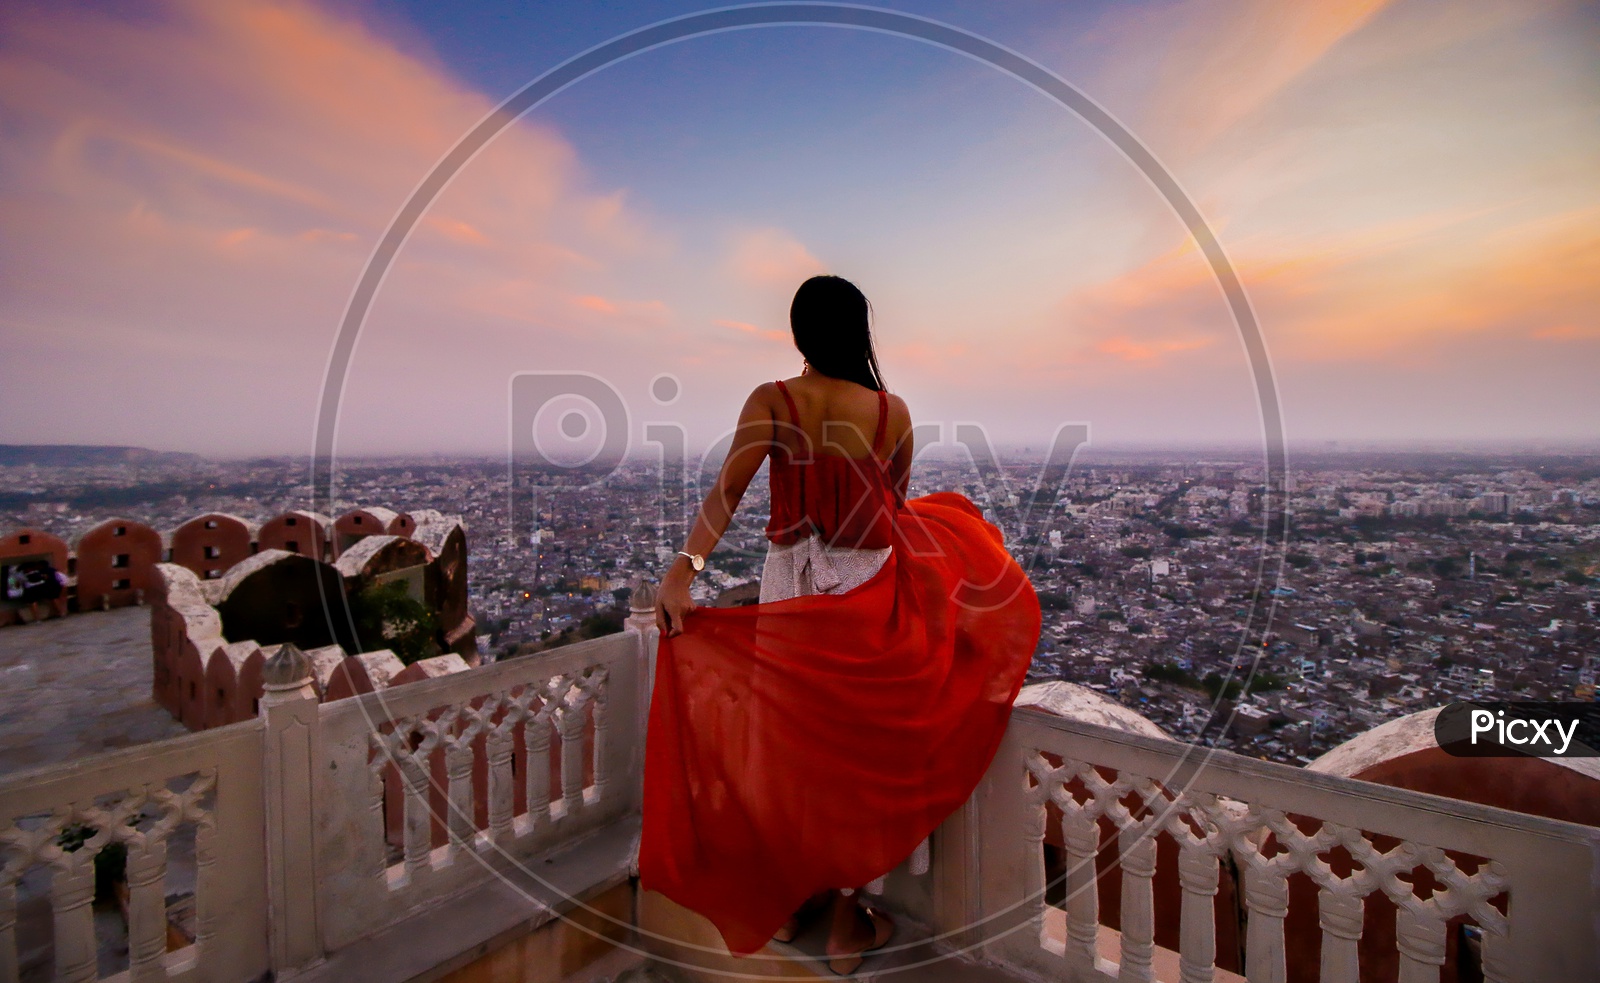 Sunset and the Lady in the Pink City